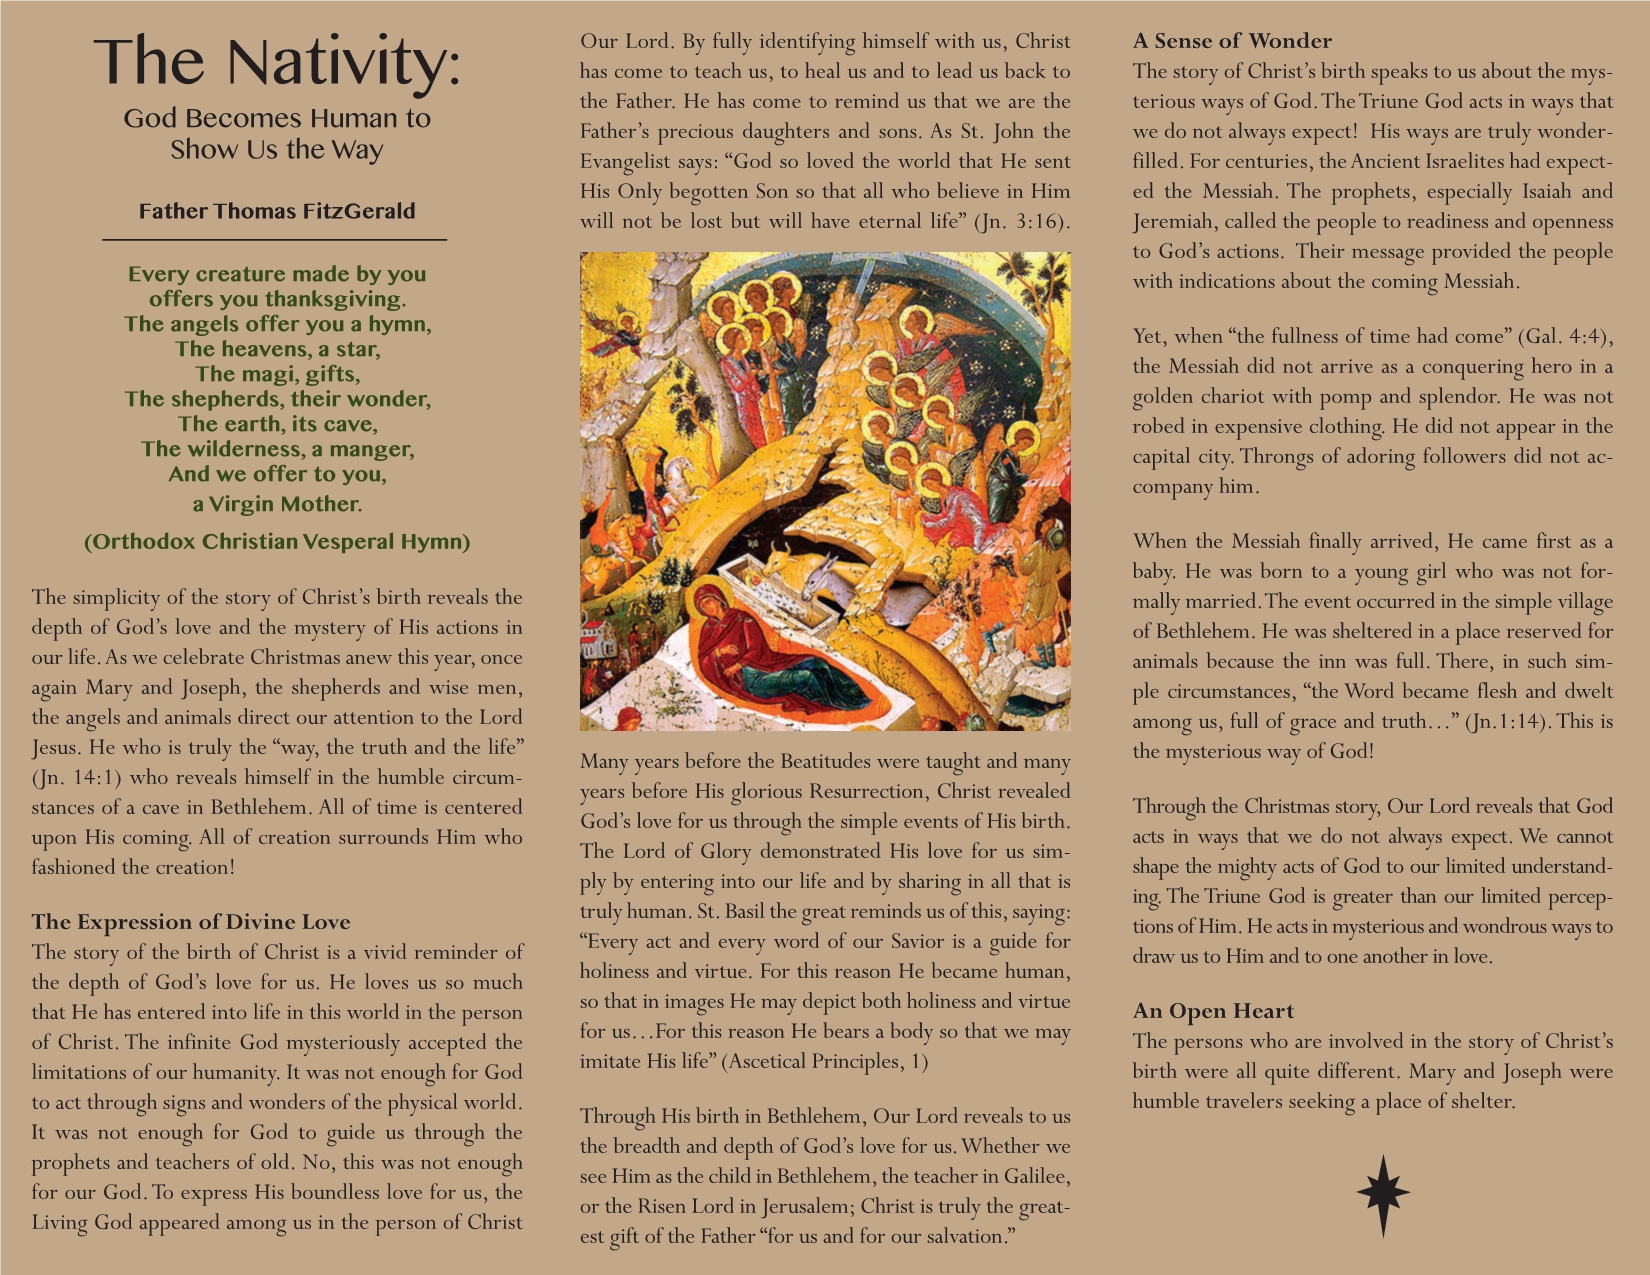 The Nativity: God becomes Human to Show Us the Way